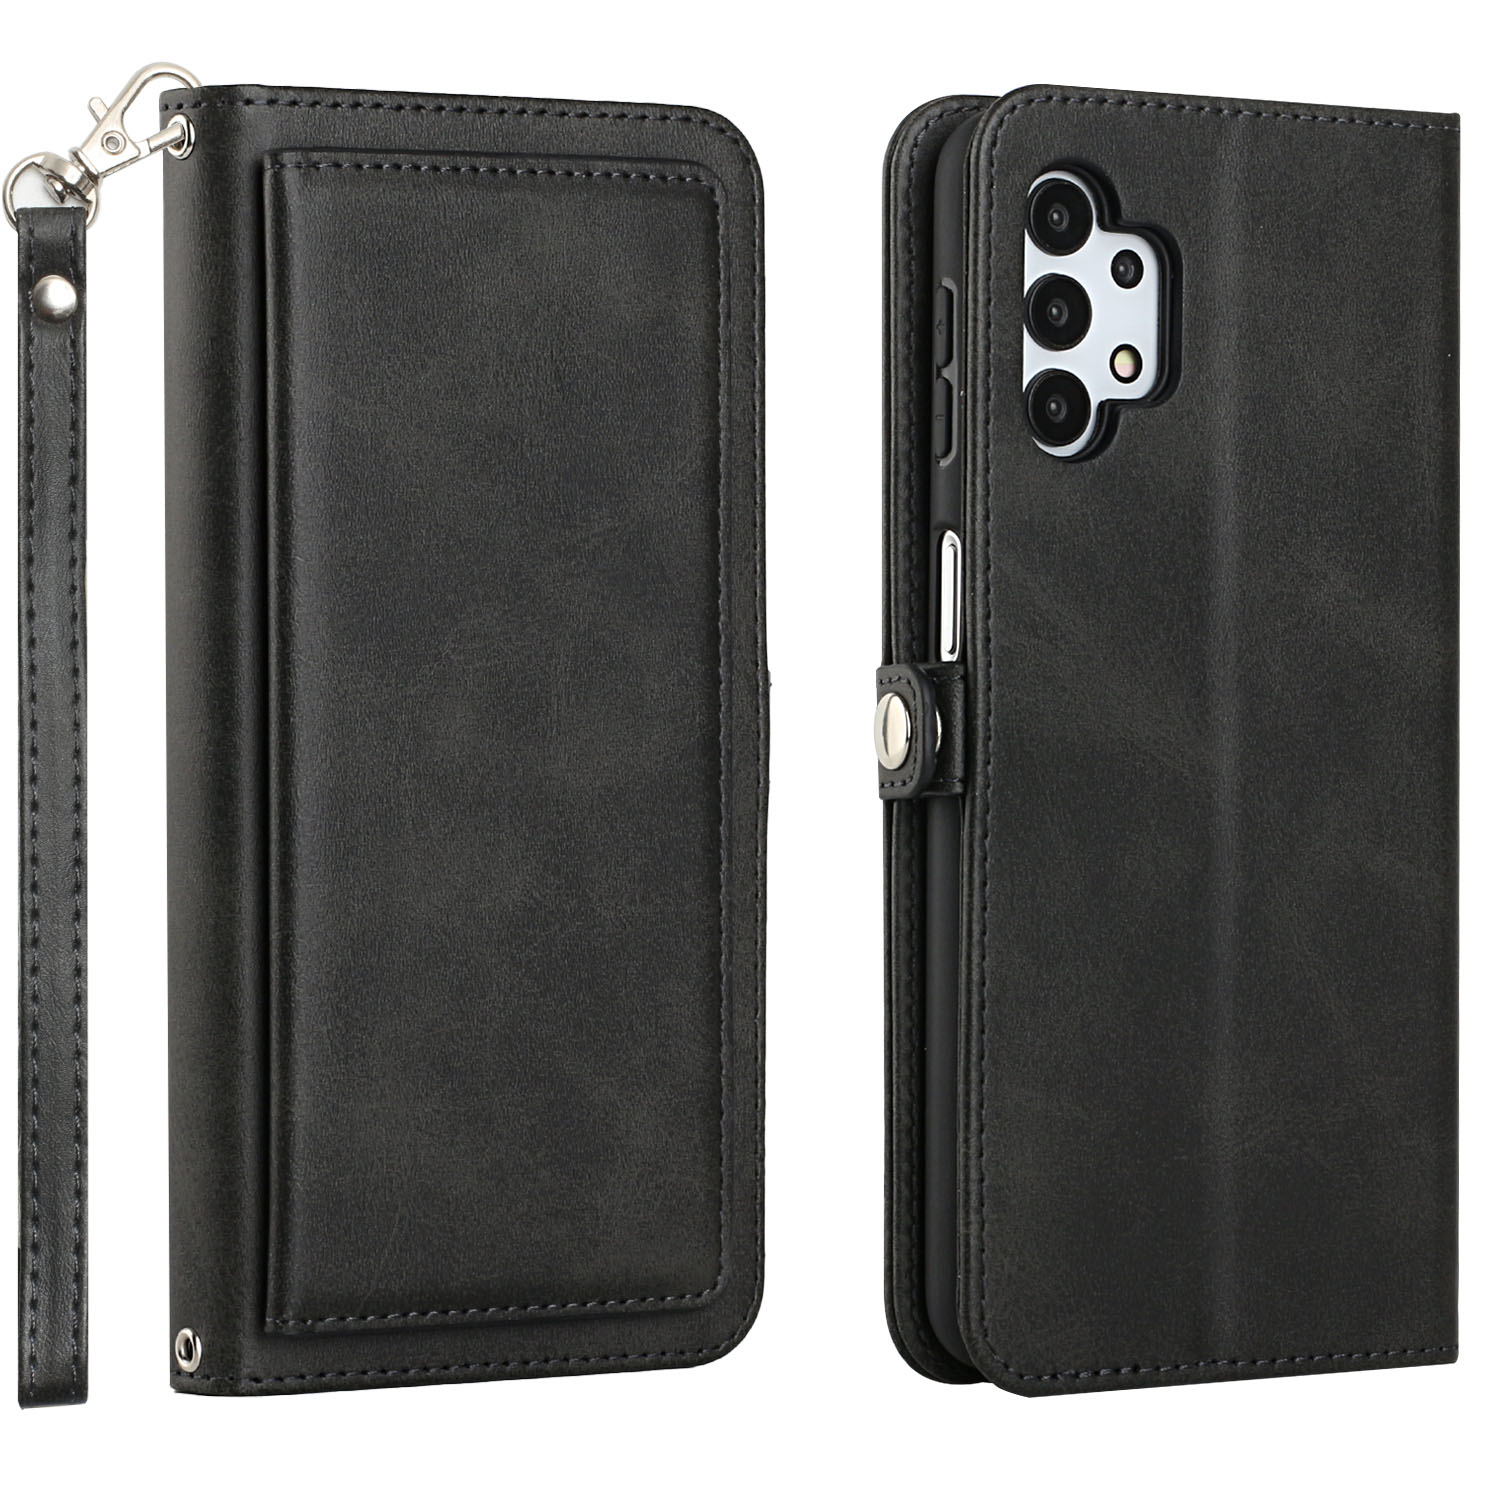 Premium PU Leather Folio WALLET Front Cover Case for Galaxy A32 5G (Black)